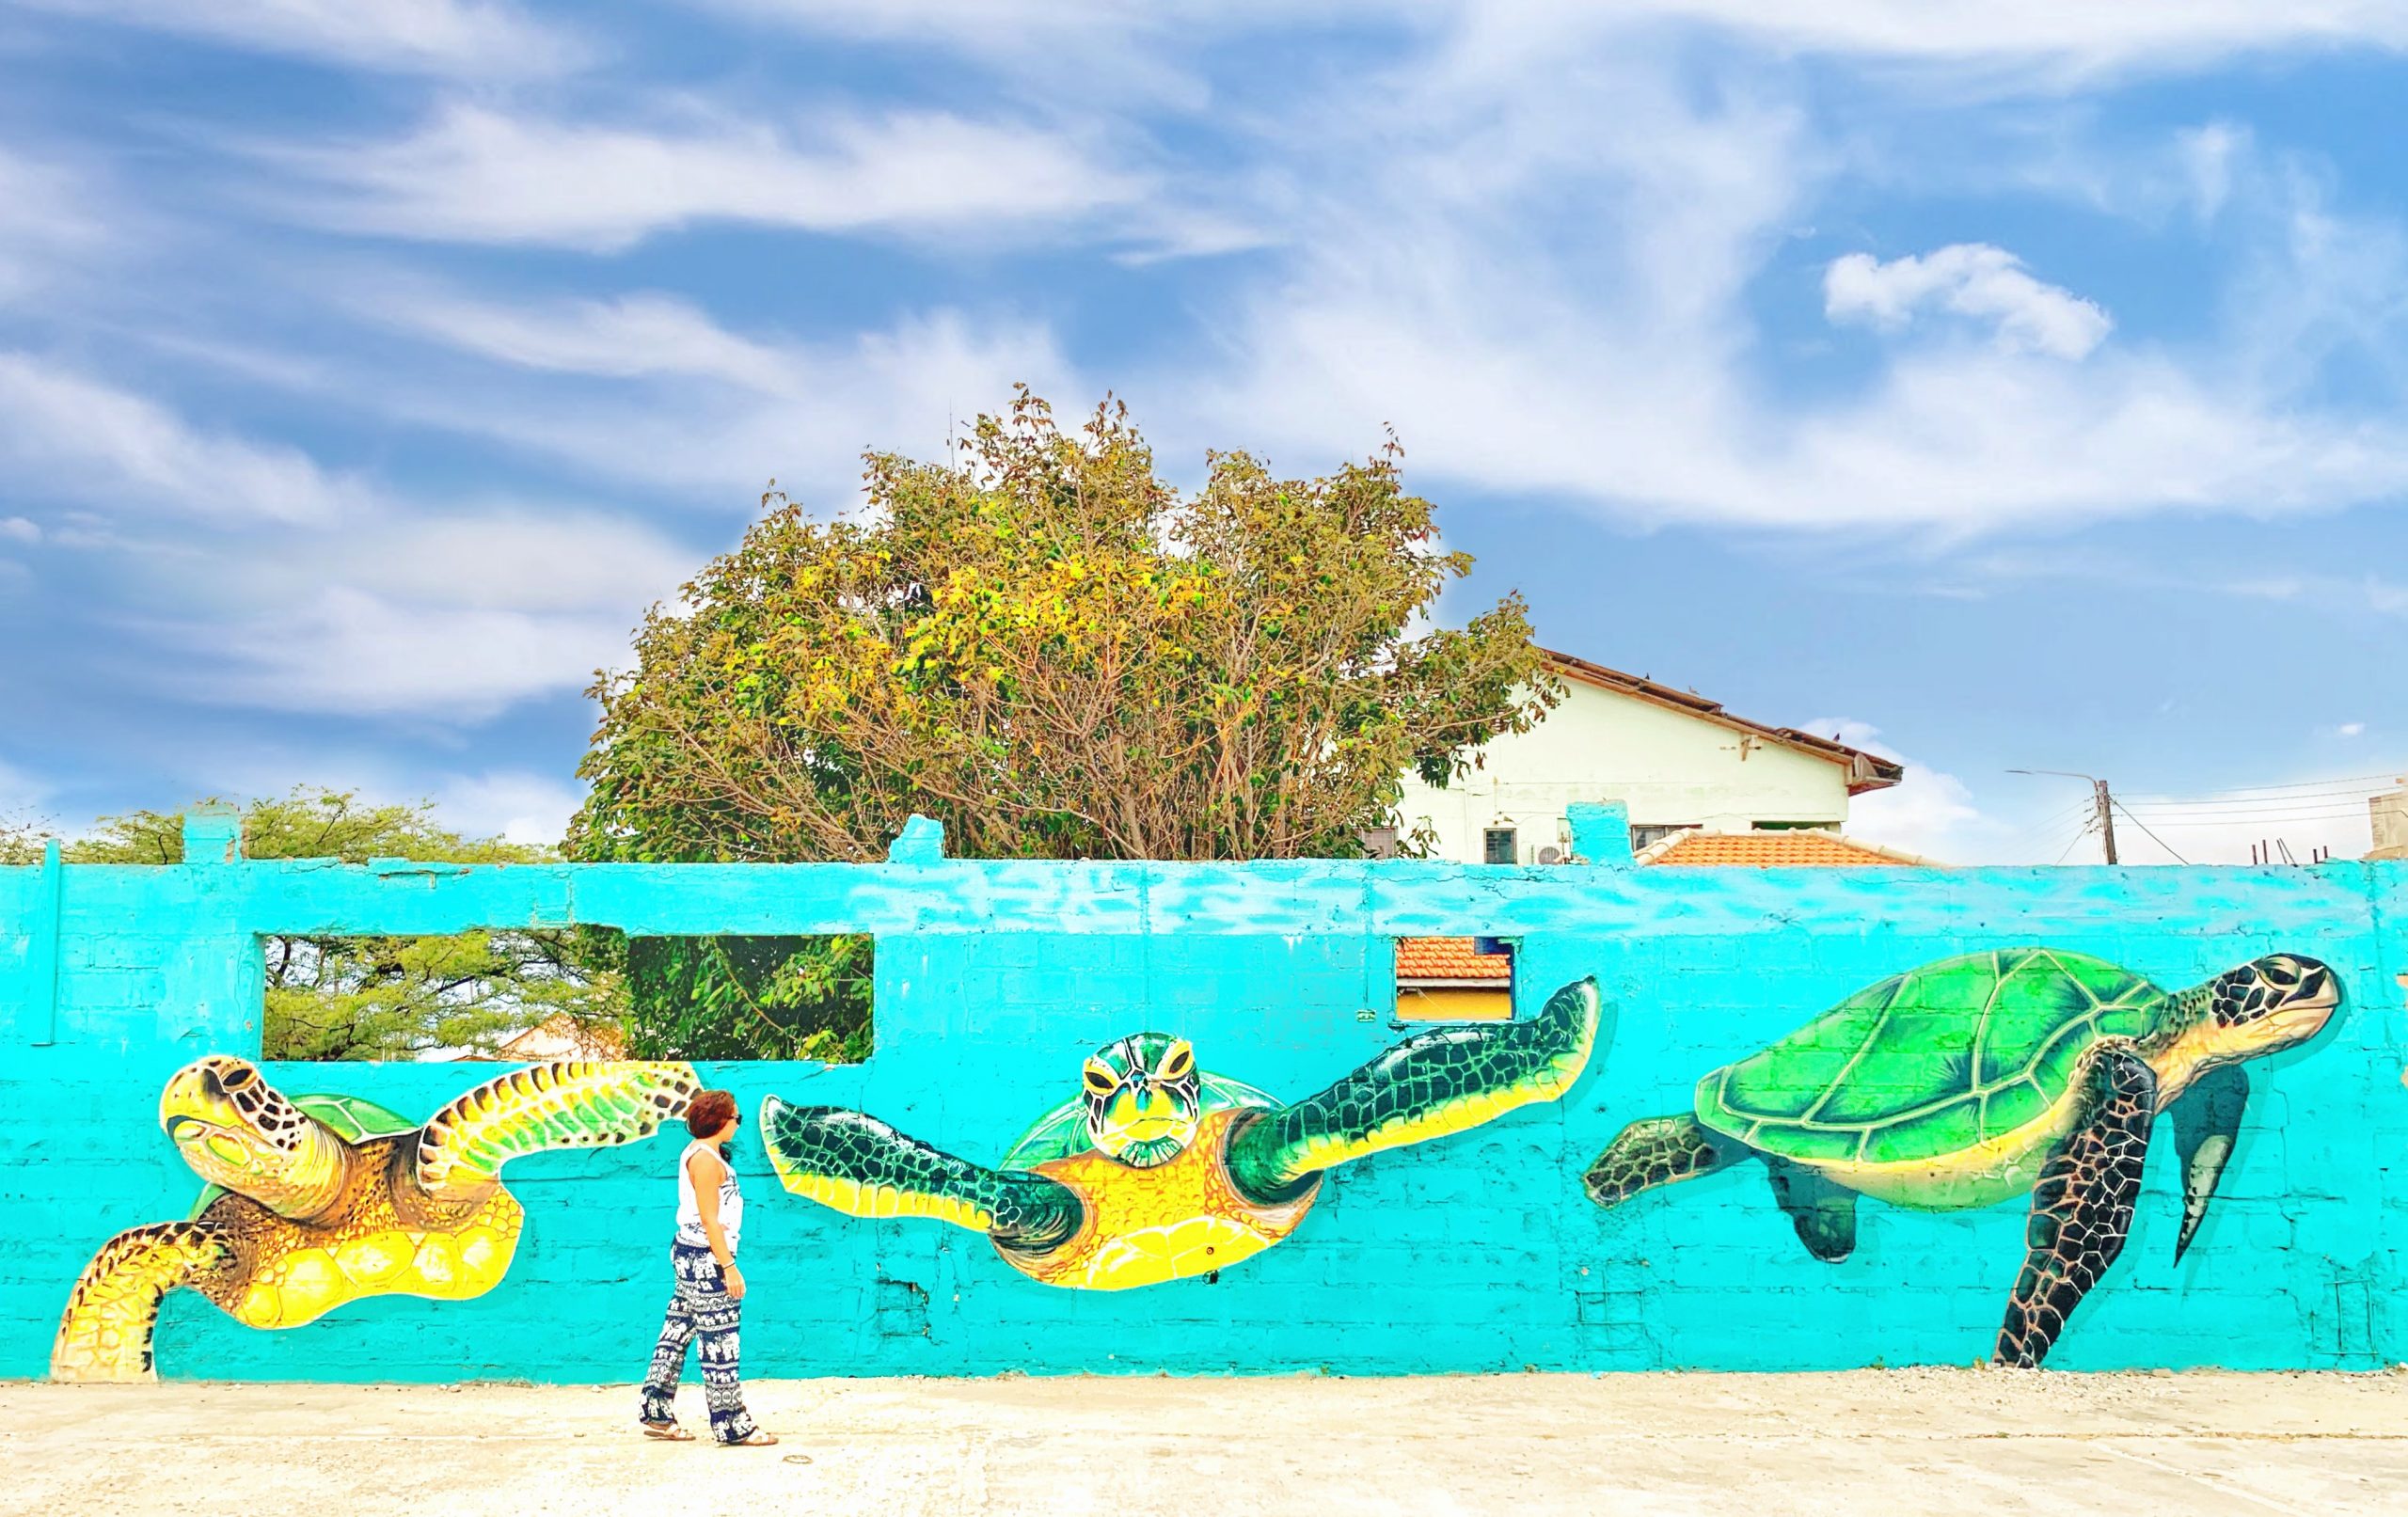 Girl walking by painted wall of 3 turtles